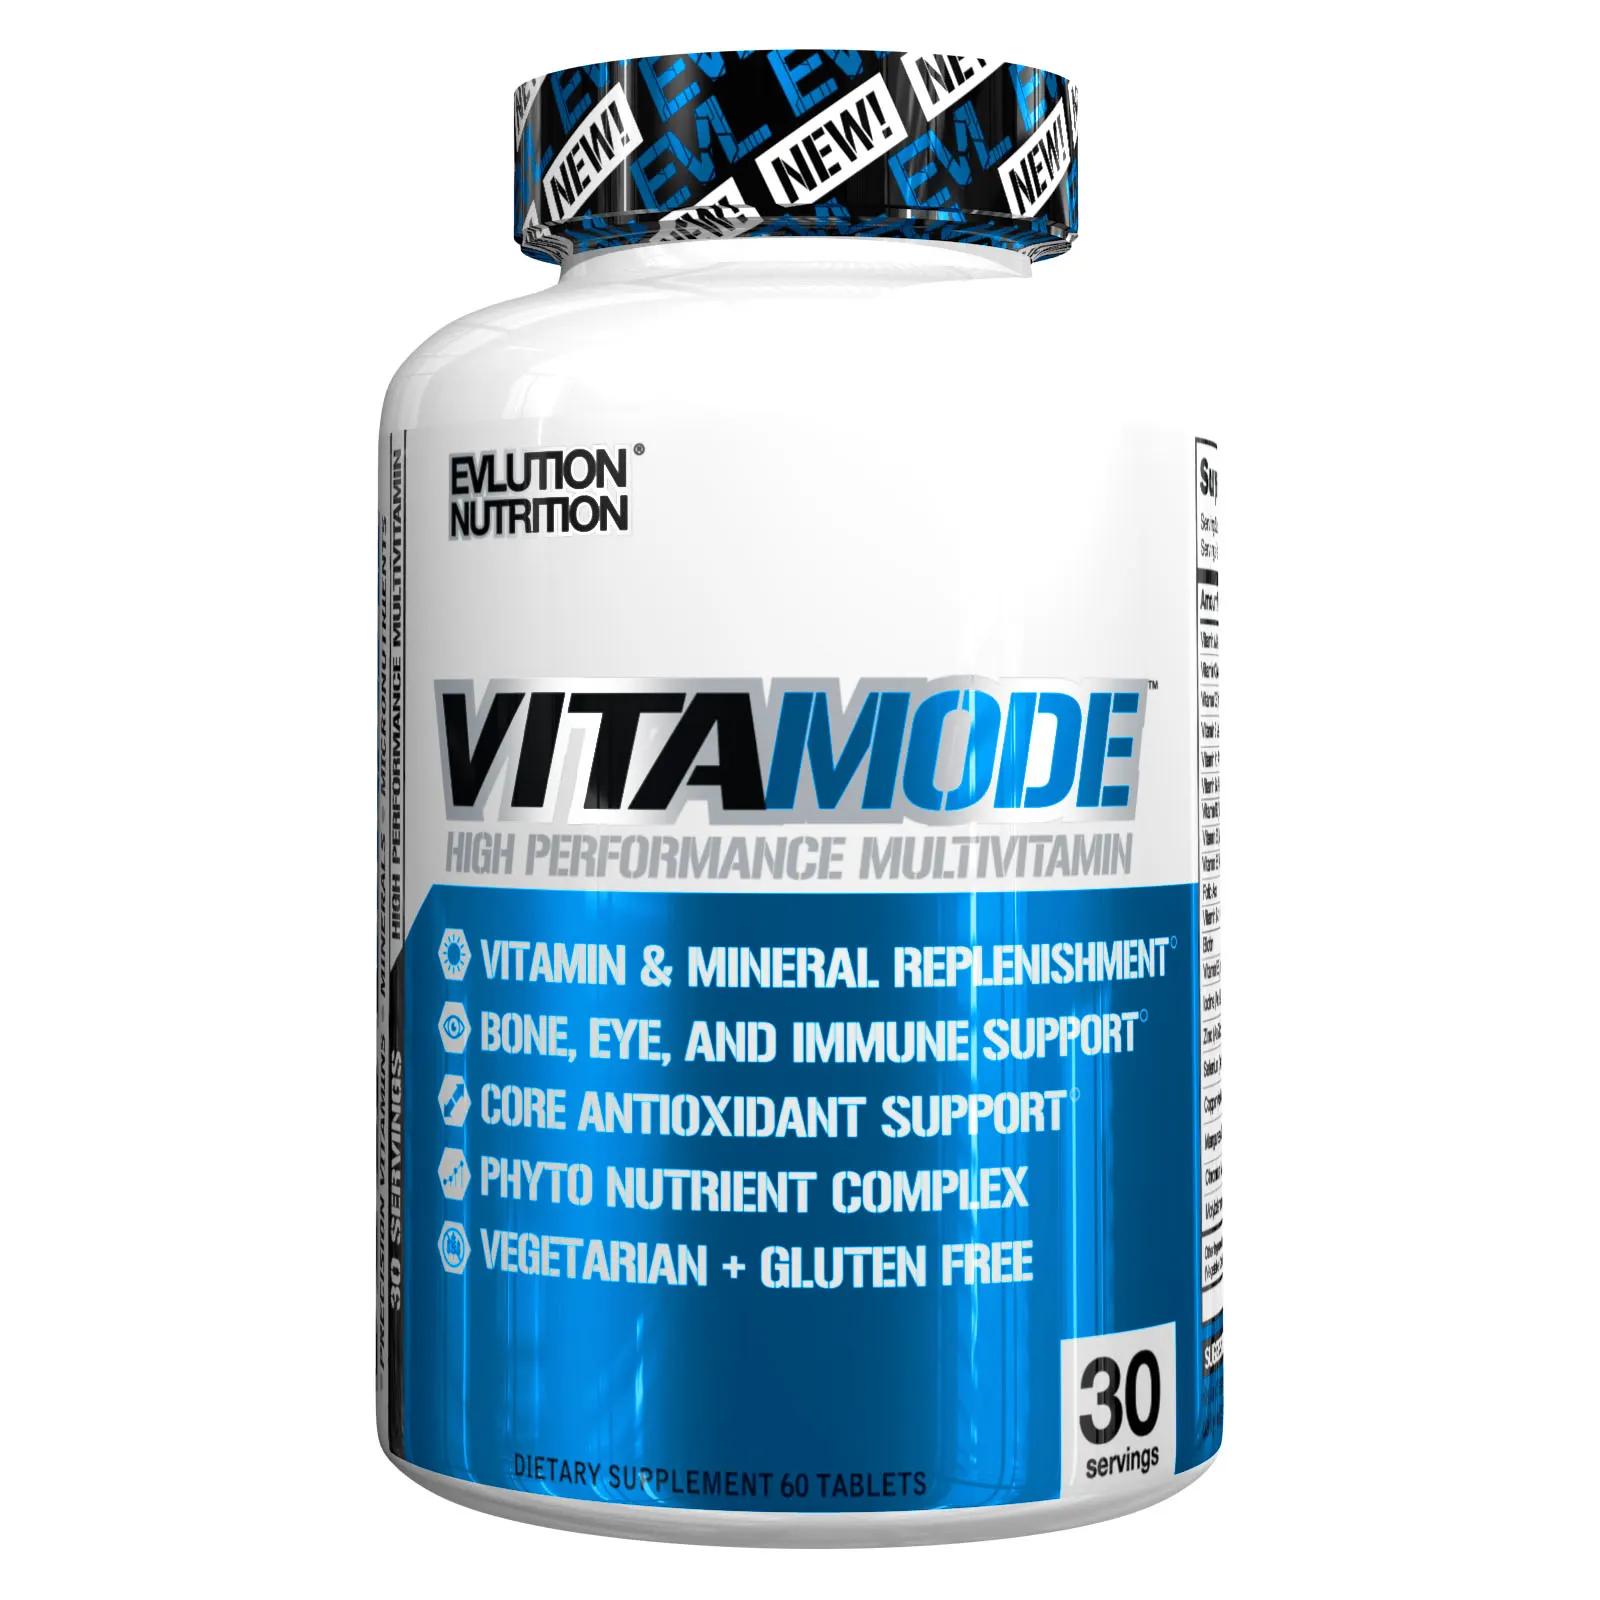 EVLution Nutrition VitaMode 60 Tablets evlution nutrition trans4orm thermogenic energizing fat burner supplement 120 capsules